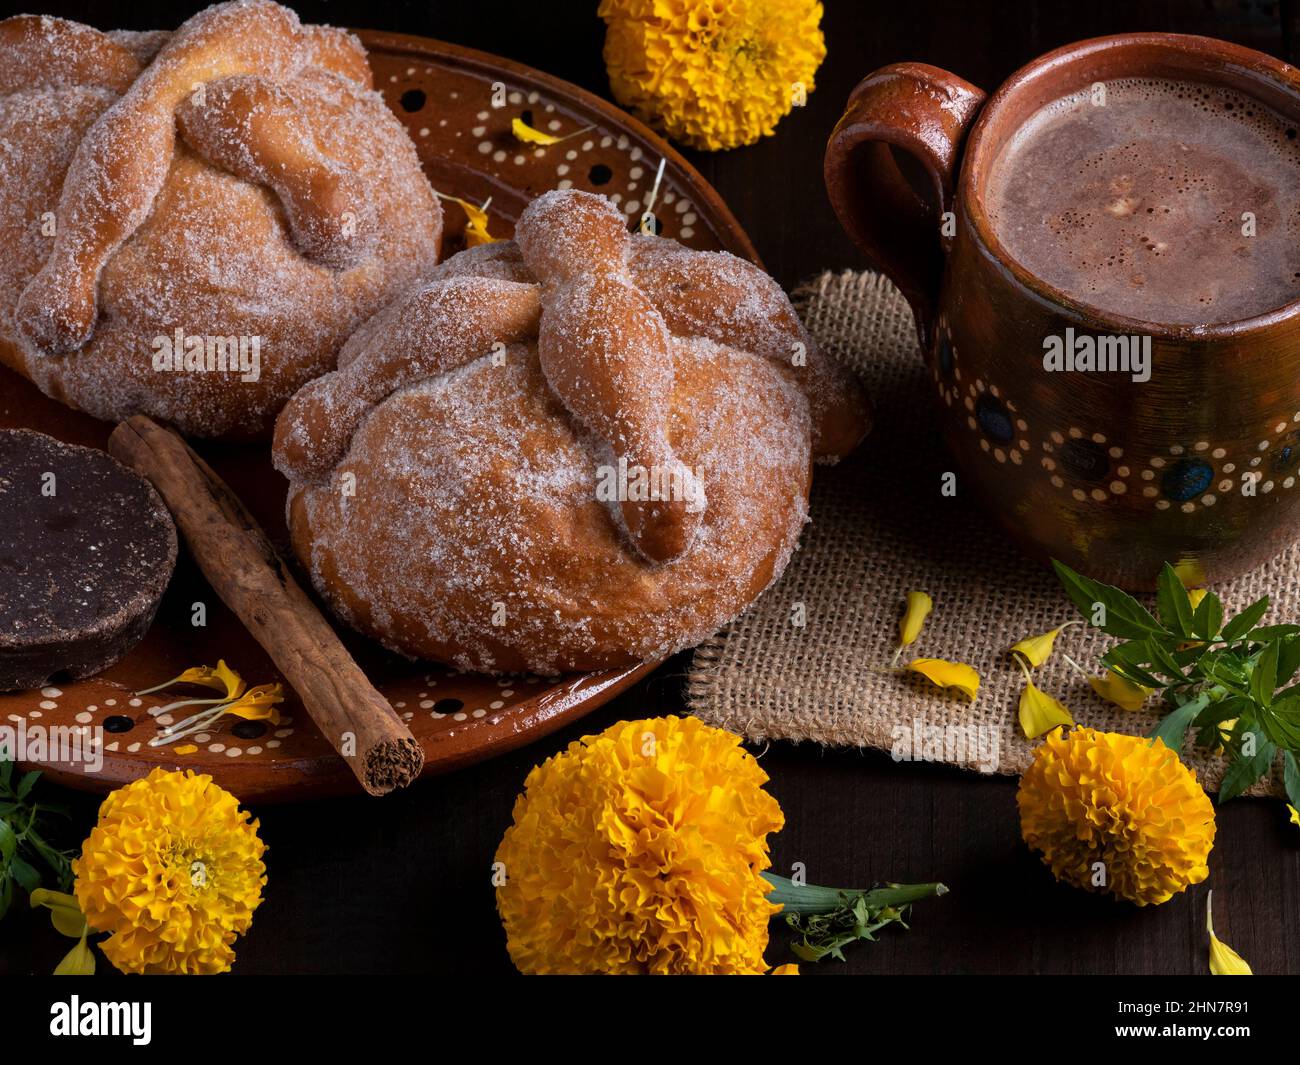 Dead bread with chocolate, Mexican food, traditions and customs. Stock Photo